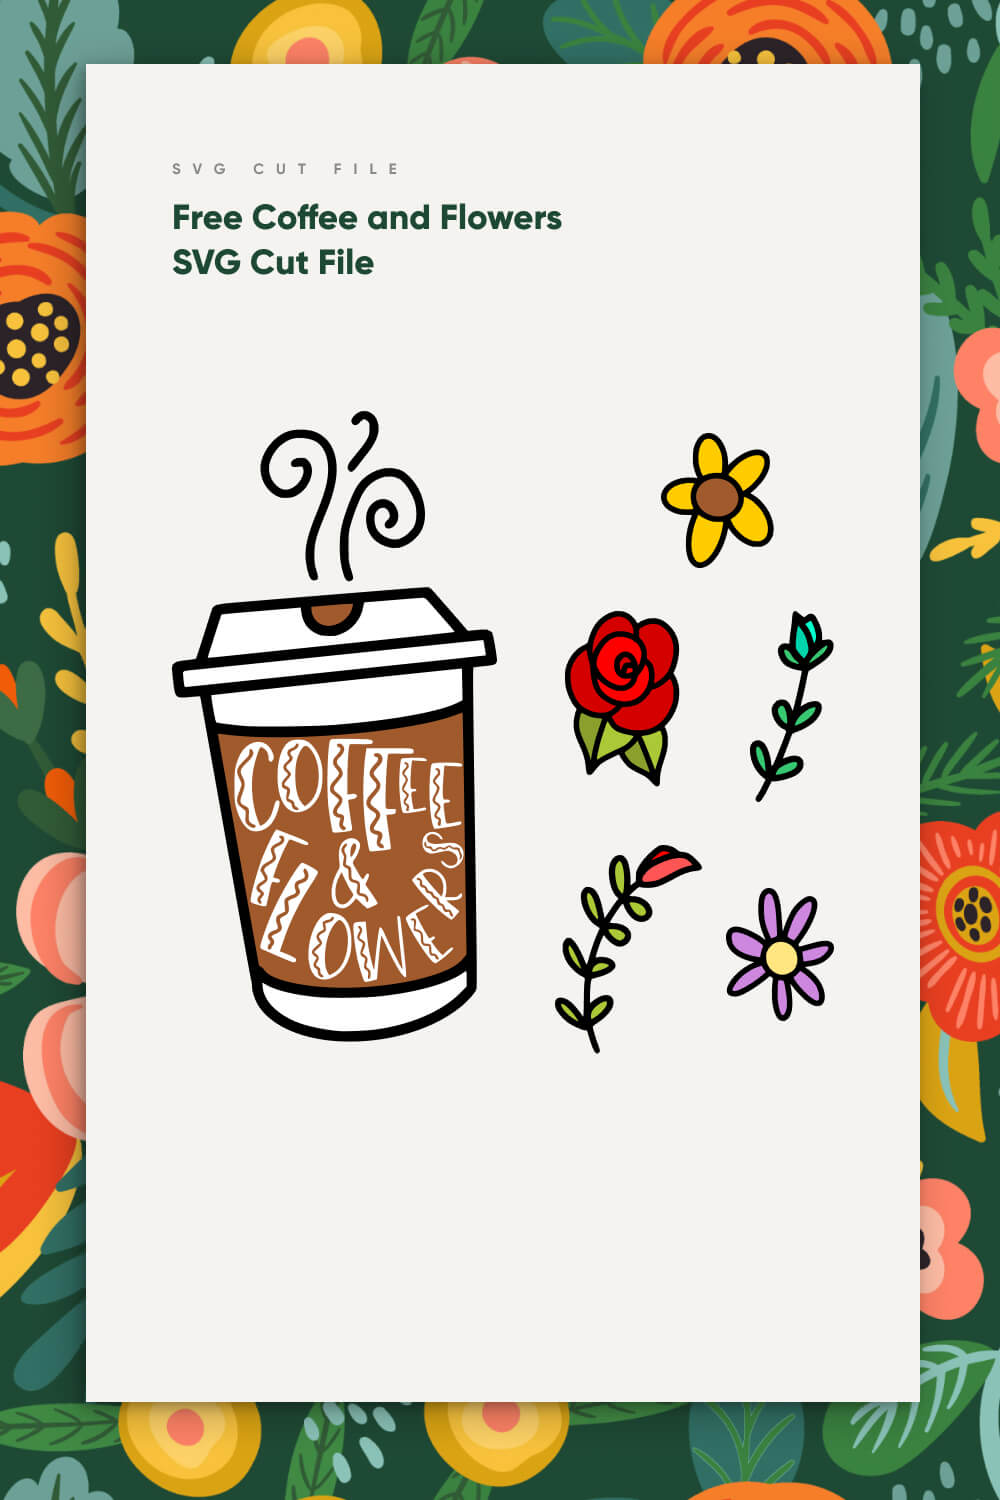 Free Coffee and Flowers SVG Cut File pinterest.